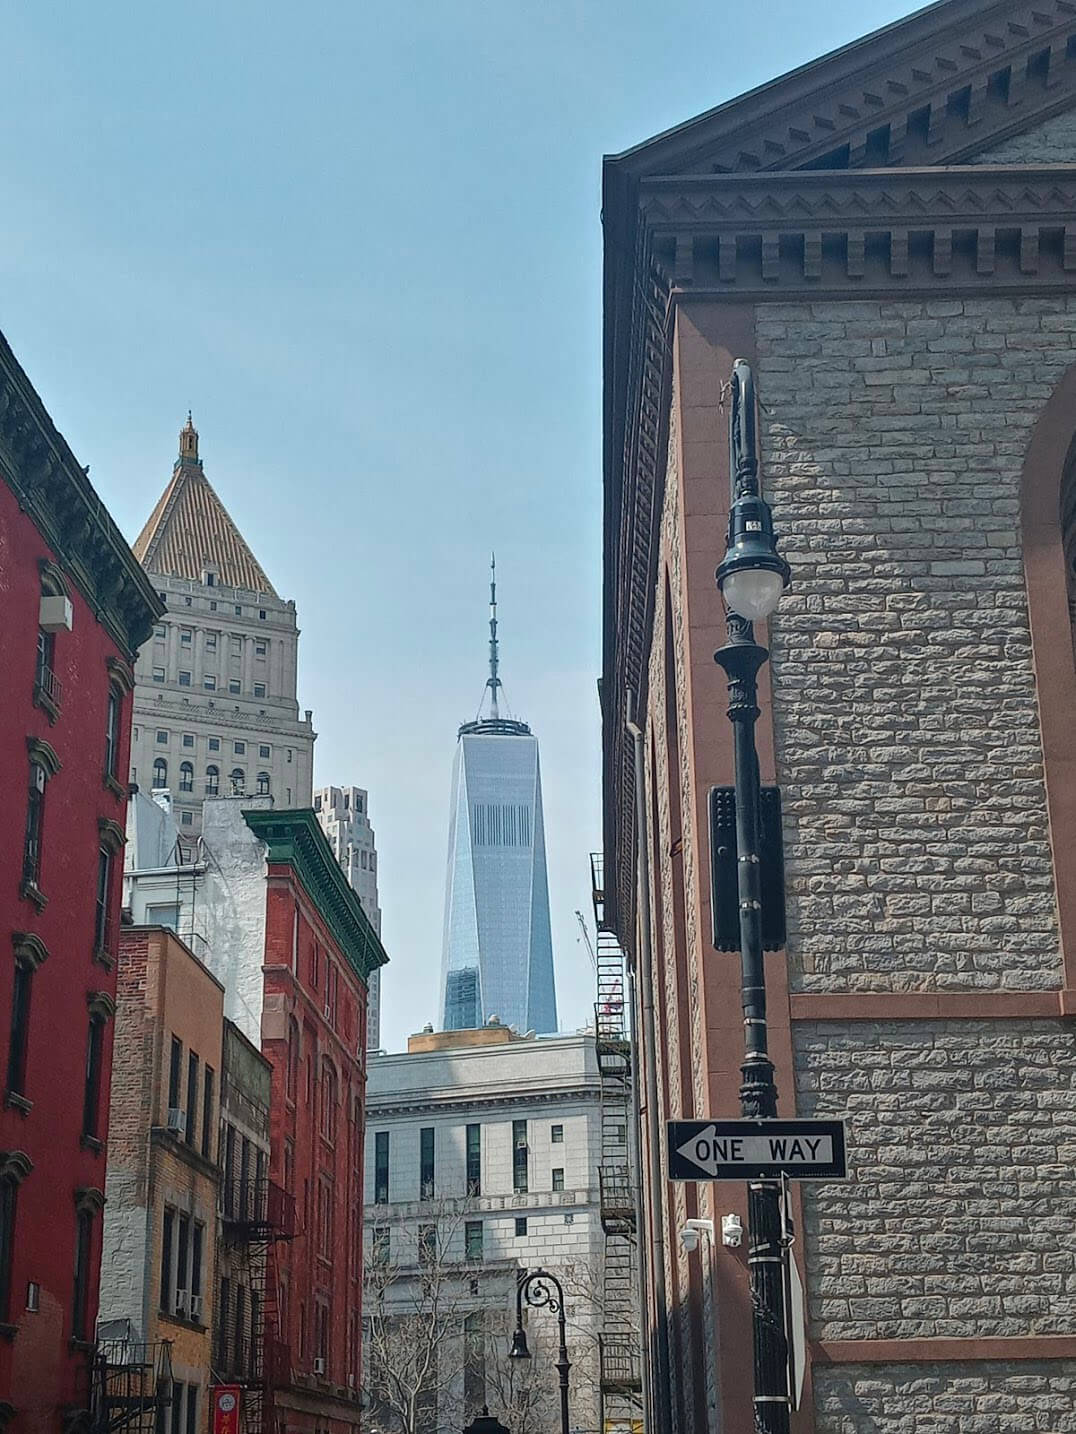 A street in Lower Manhattan with view of the Freedom Tower